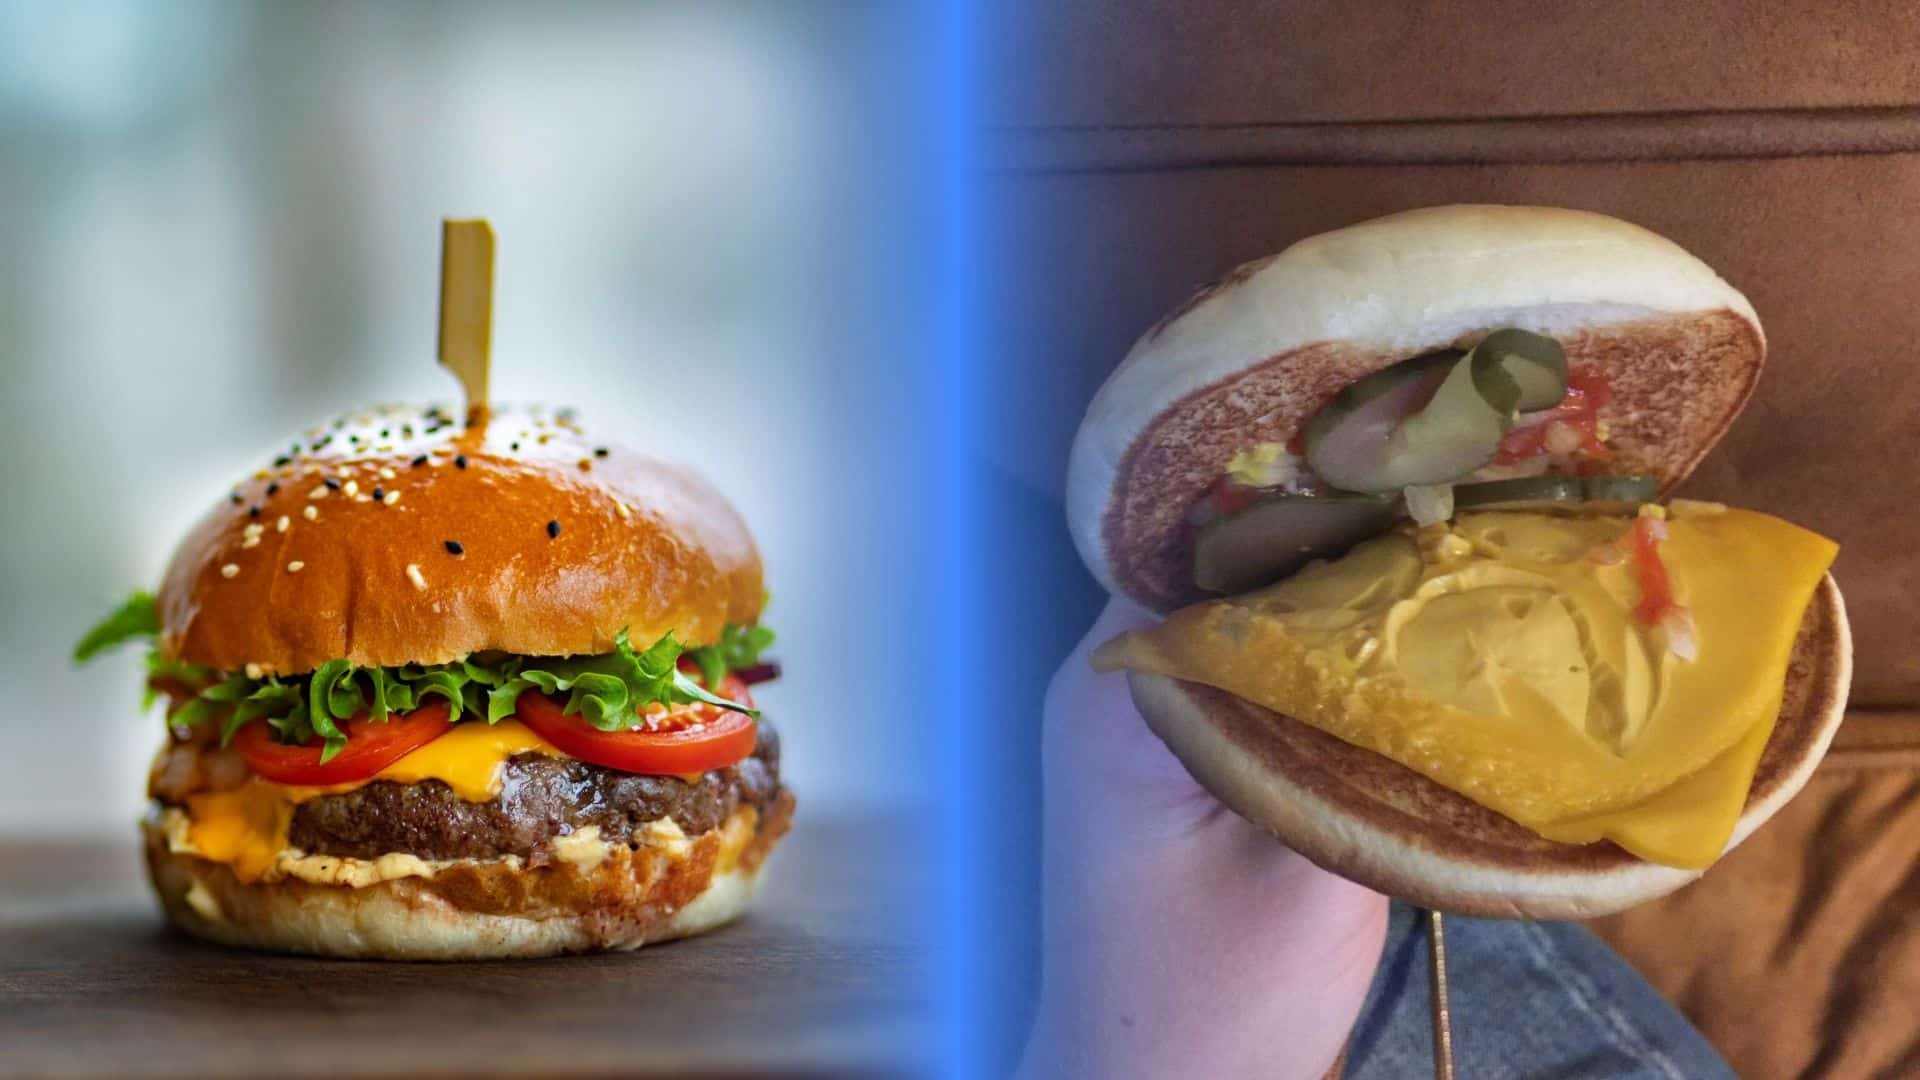 Popular fast-food chains McDonalds and Wendy’s sued for misleading burger ads